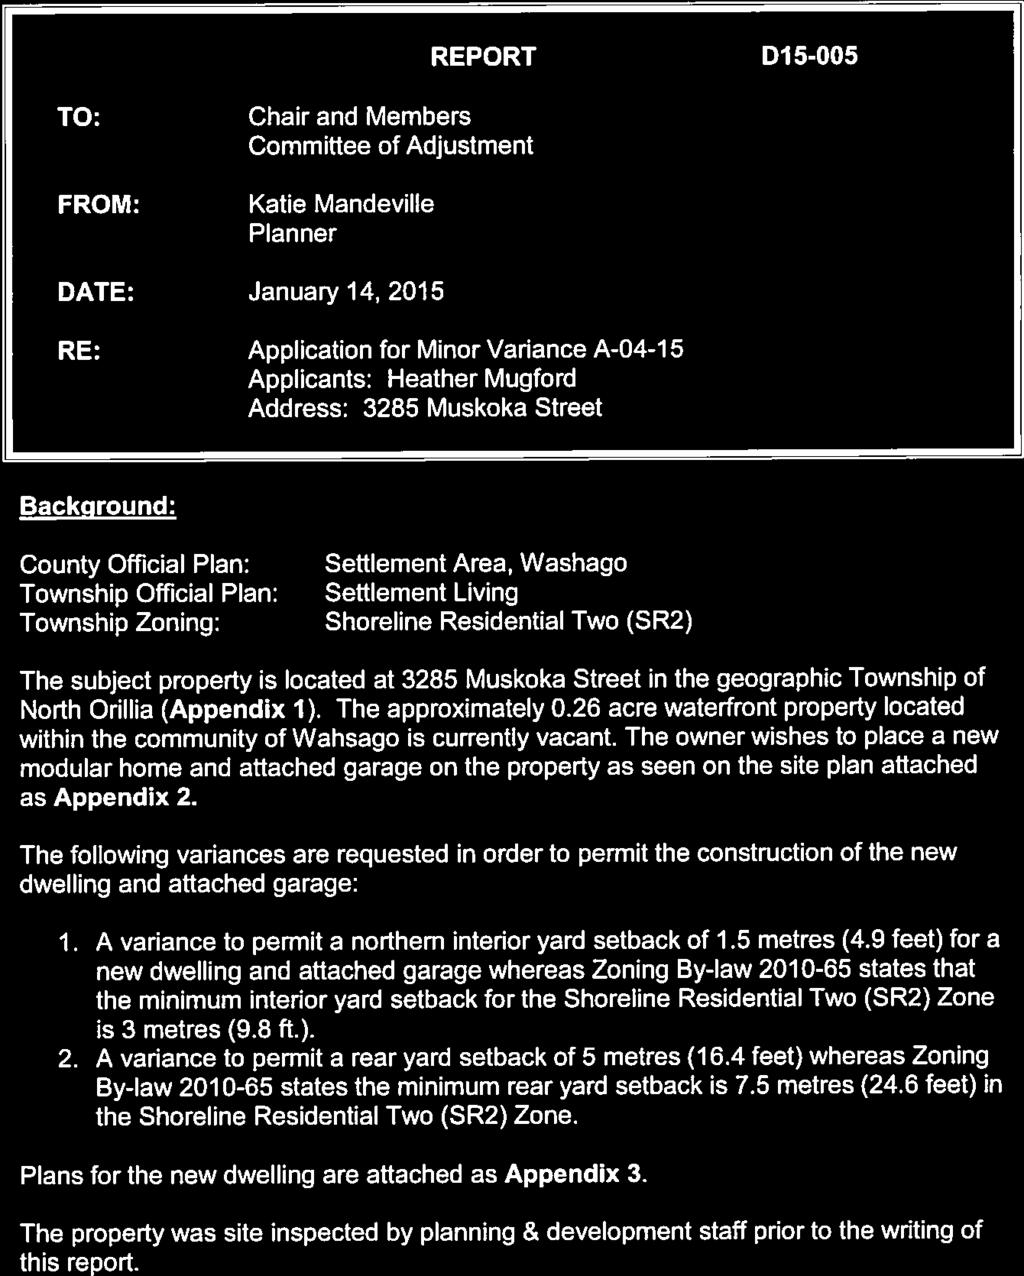 D-5 REPORT Dl 5-005 TO: FROM: Chair and Members Committee of Adjustment Katie Mandevflle Planner DATE: January 14, 2015 RE: Application for Minor Variance A-04-1 5 Applicants: Heather Mugford